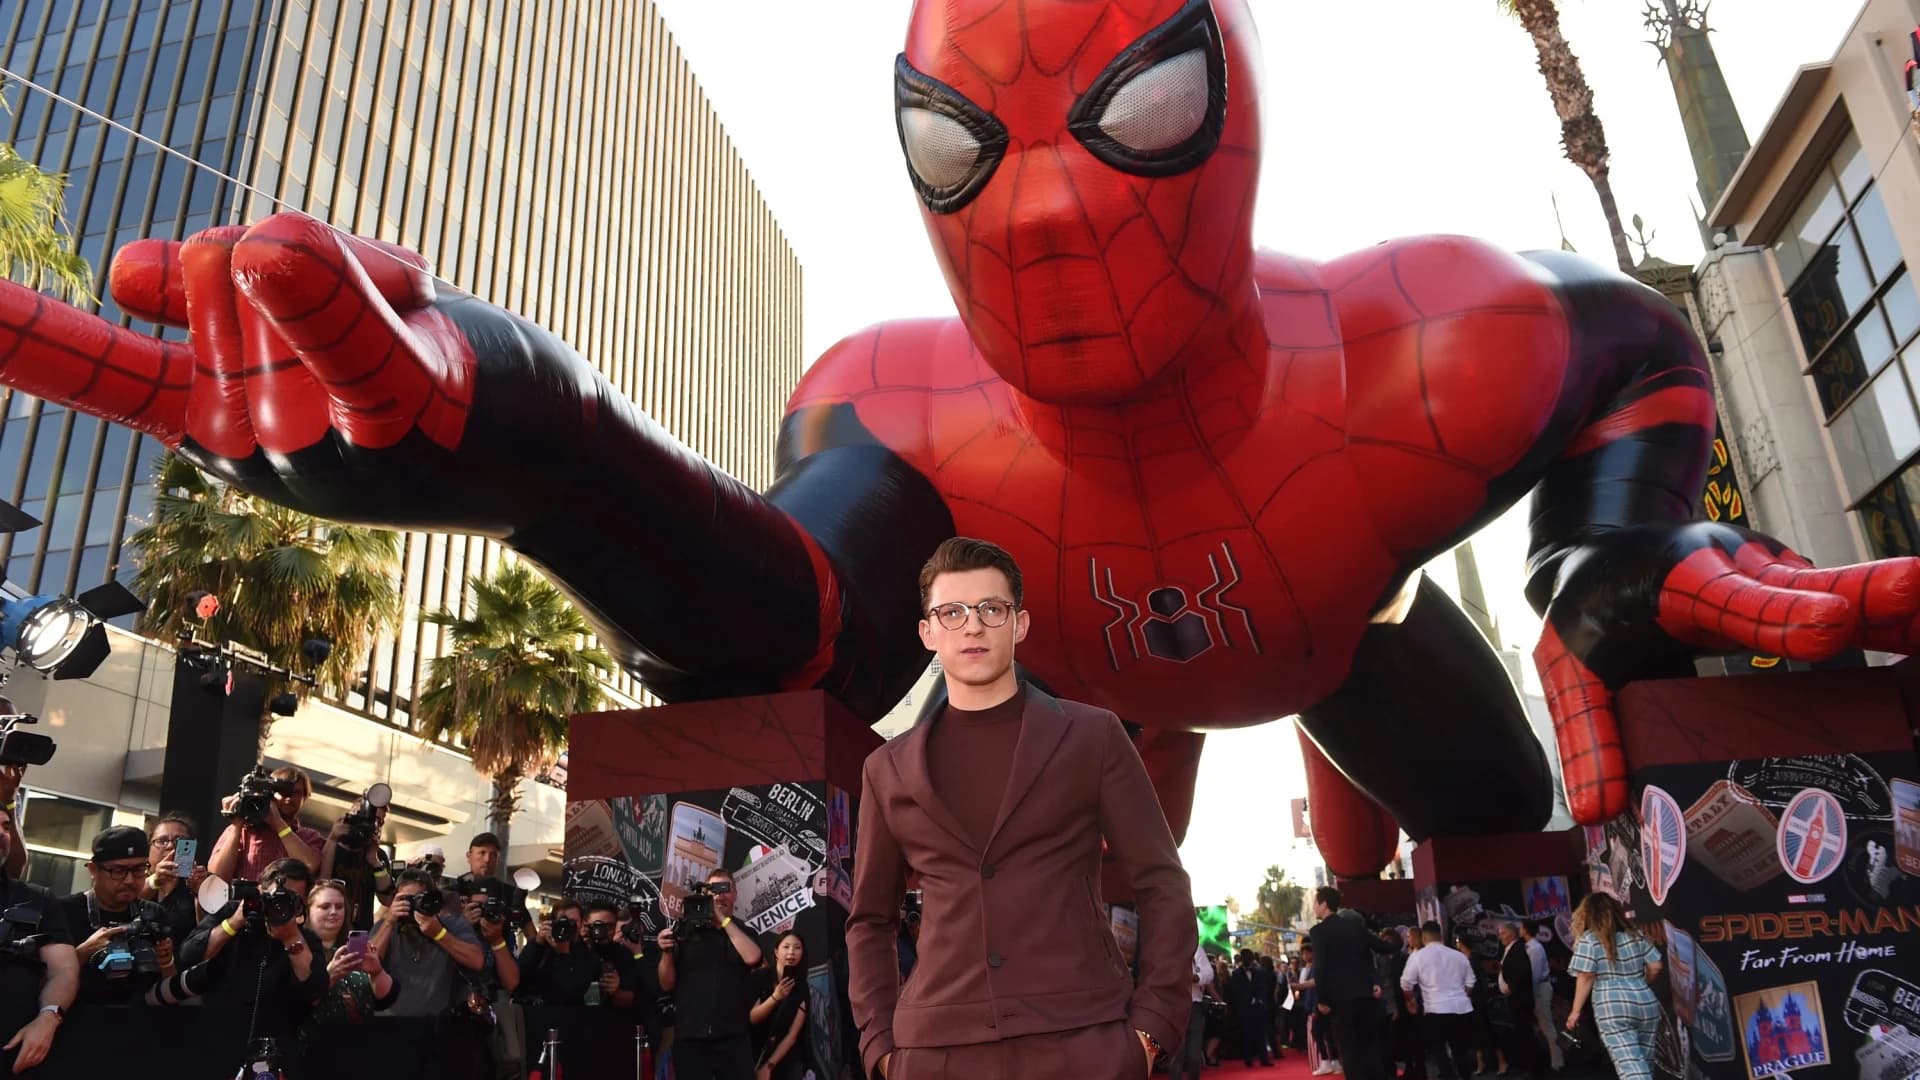 Marvel's involvement in 'Spider-Man' movies may be in doubt